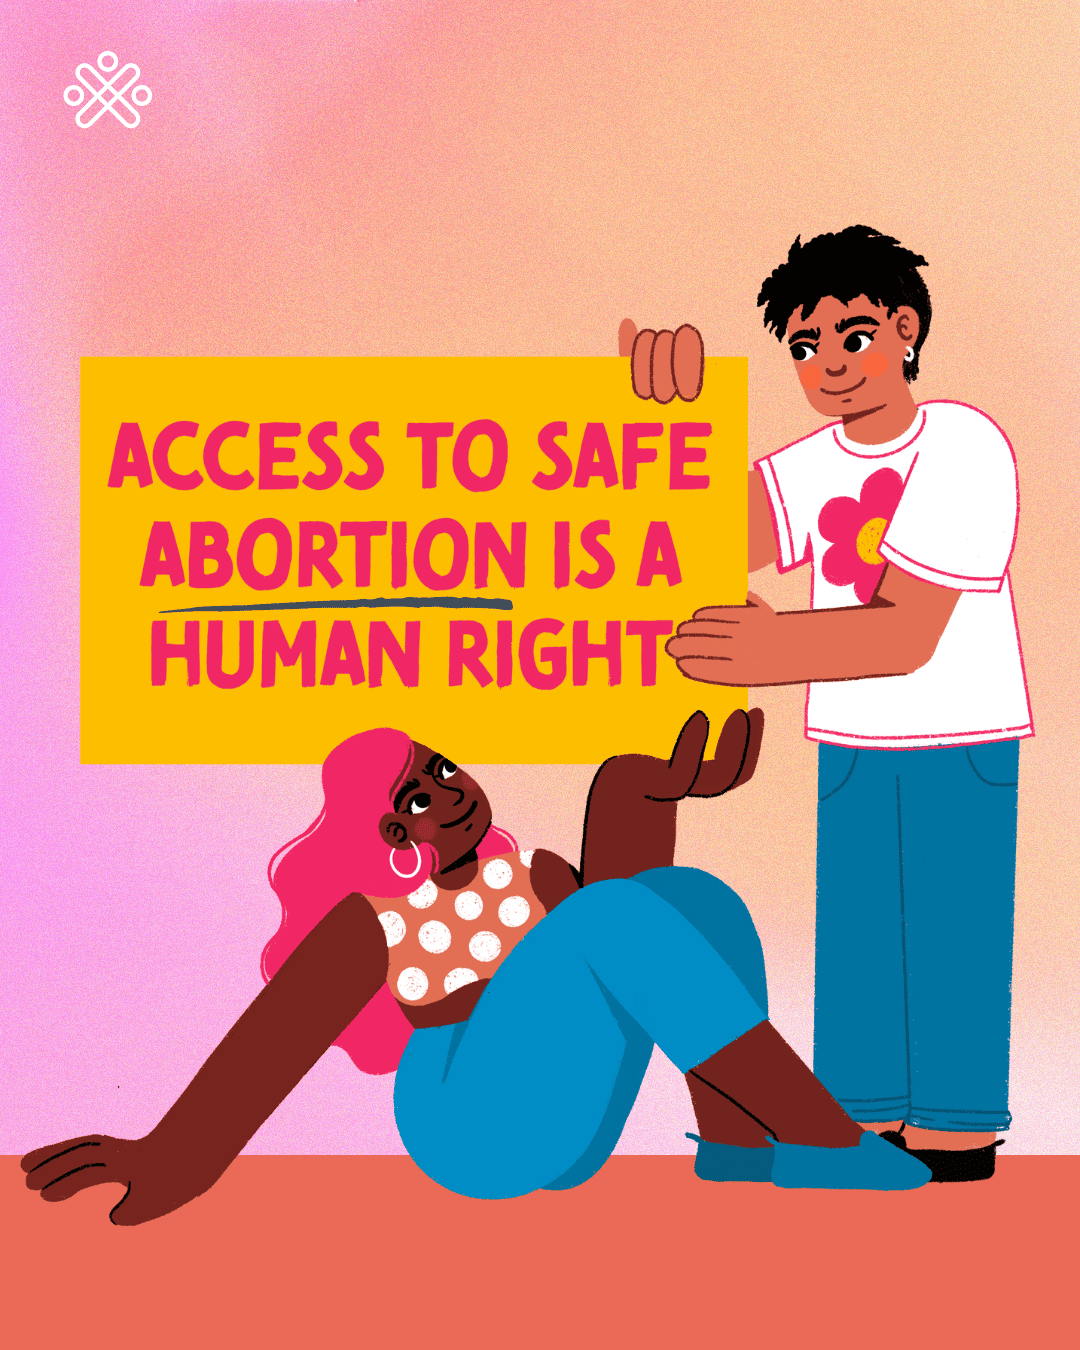 Two people holding a sign that says "Access to safe abortion is a human right"